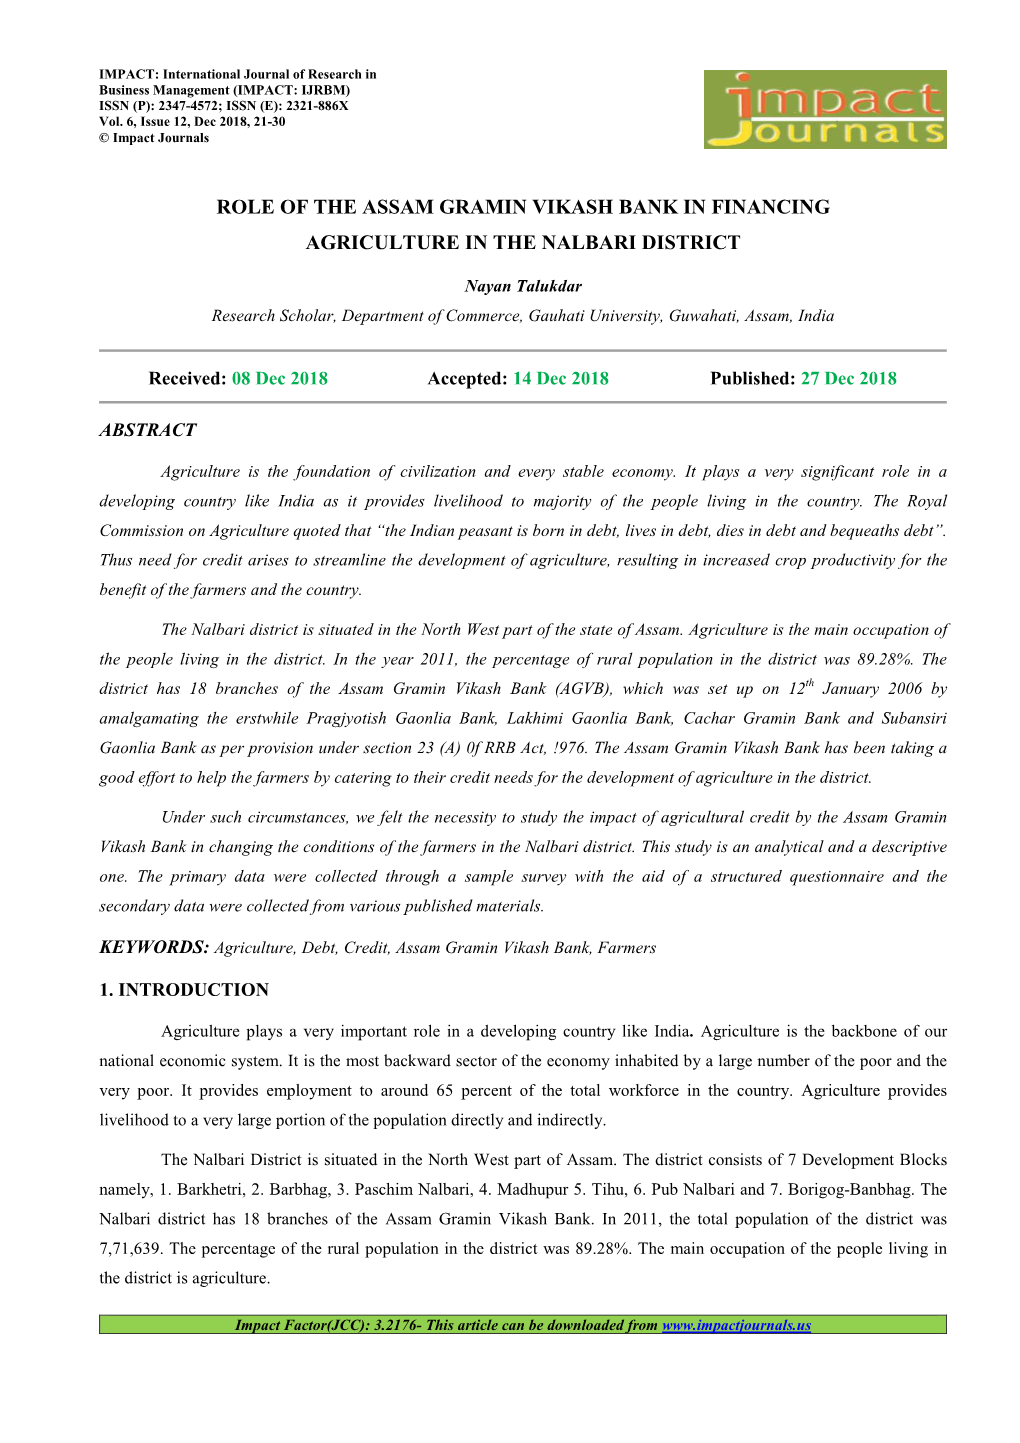 Role of the Assam Gramin Vikash Bank in Financing Agriculture in the Nalbari District